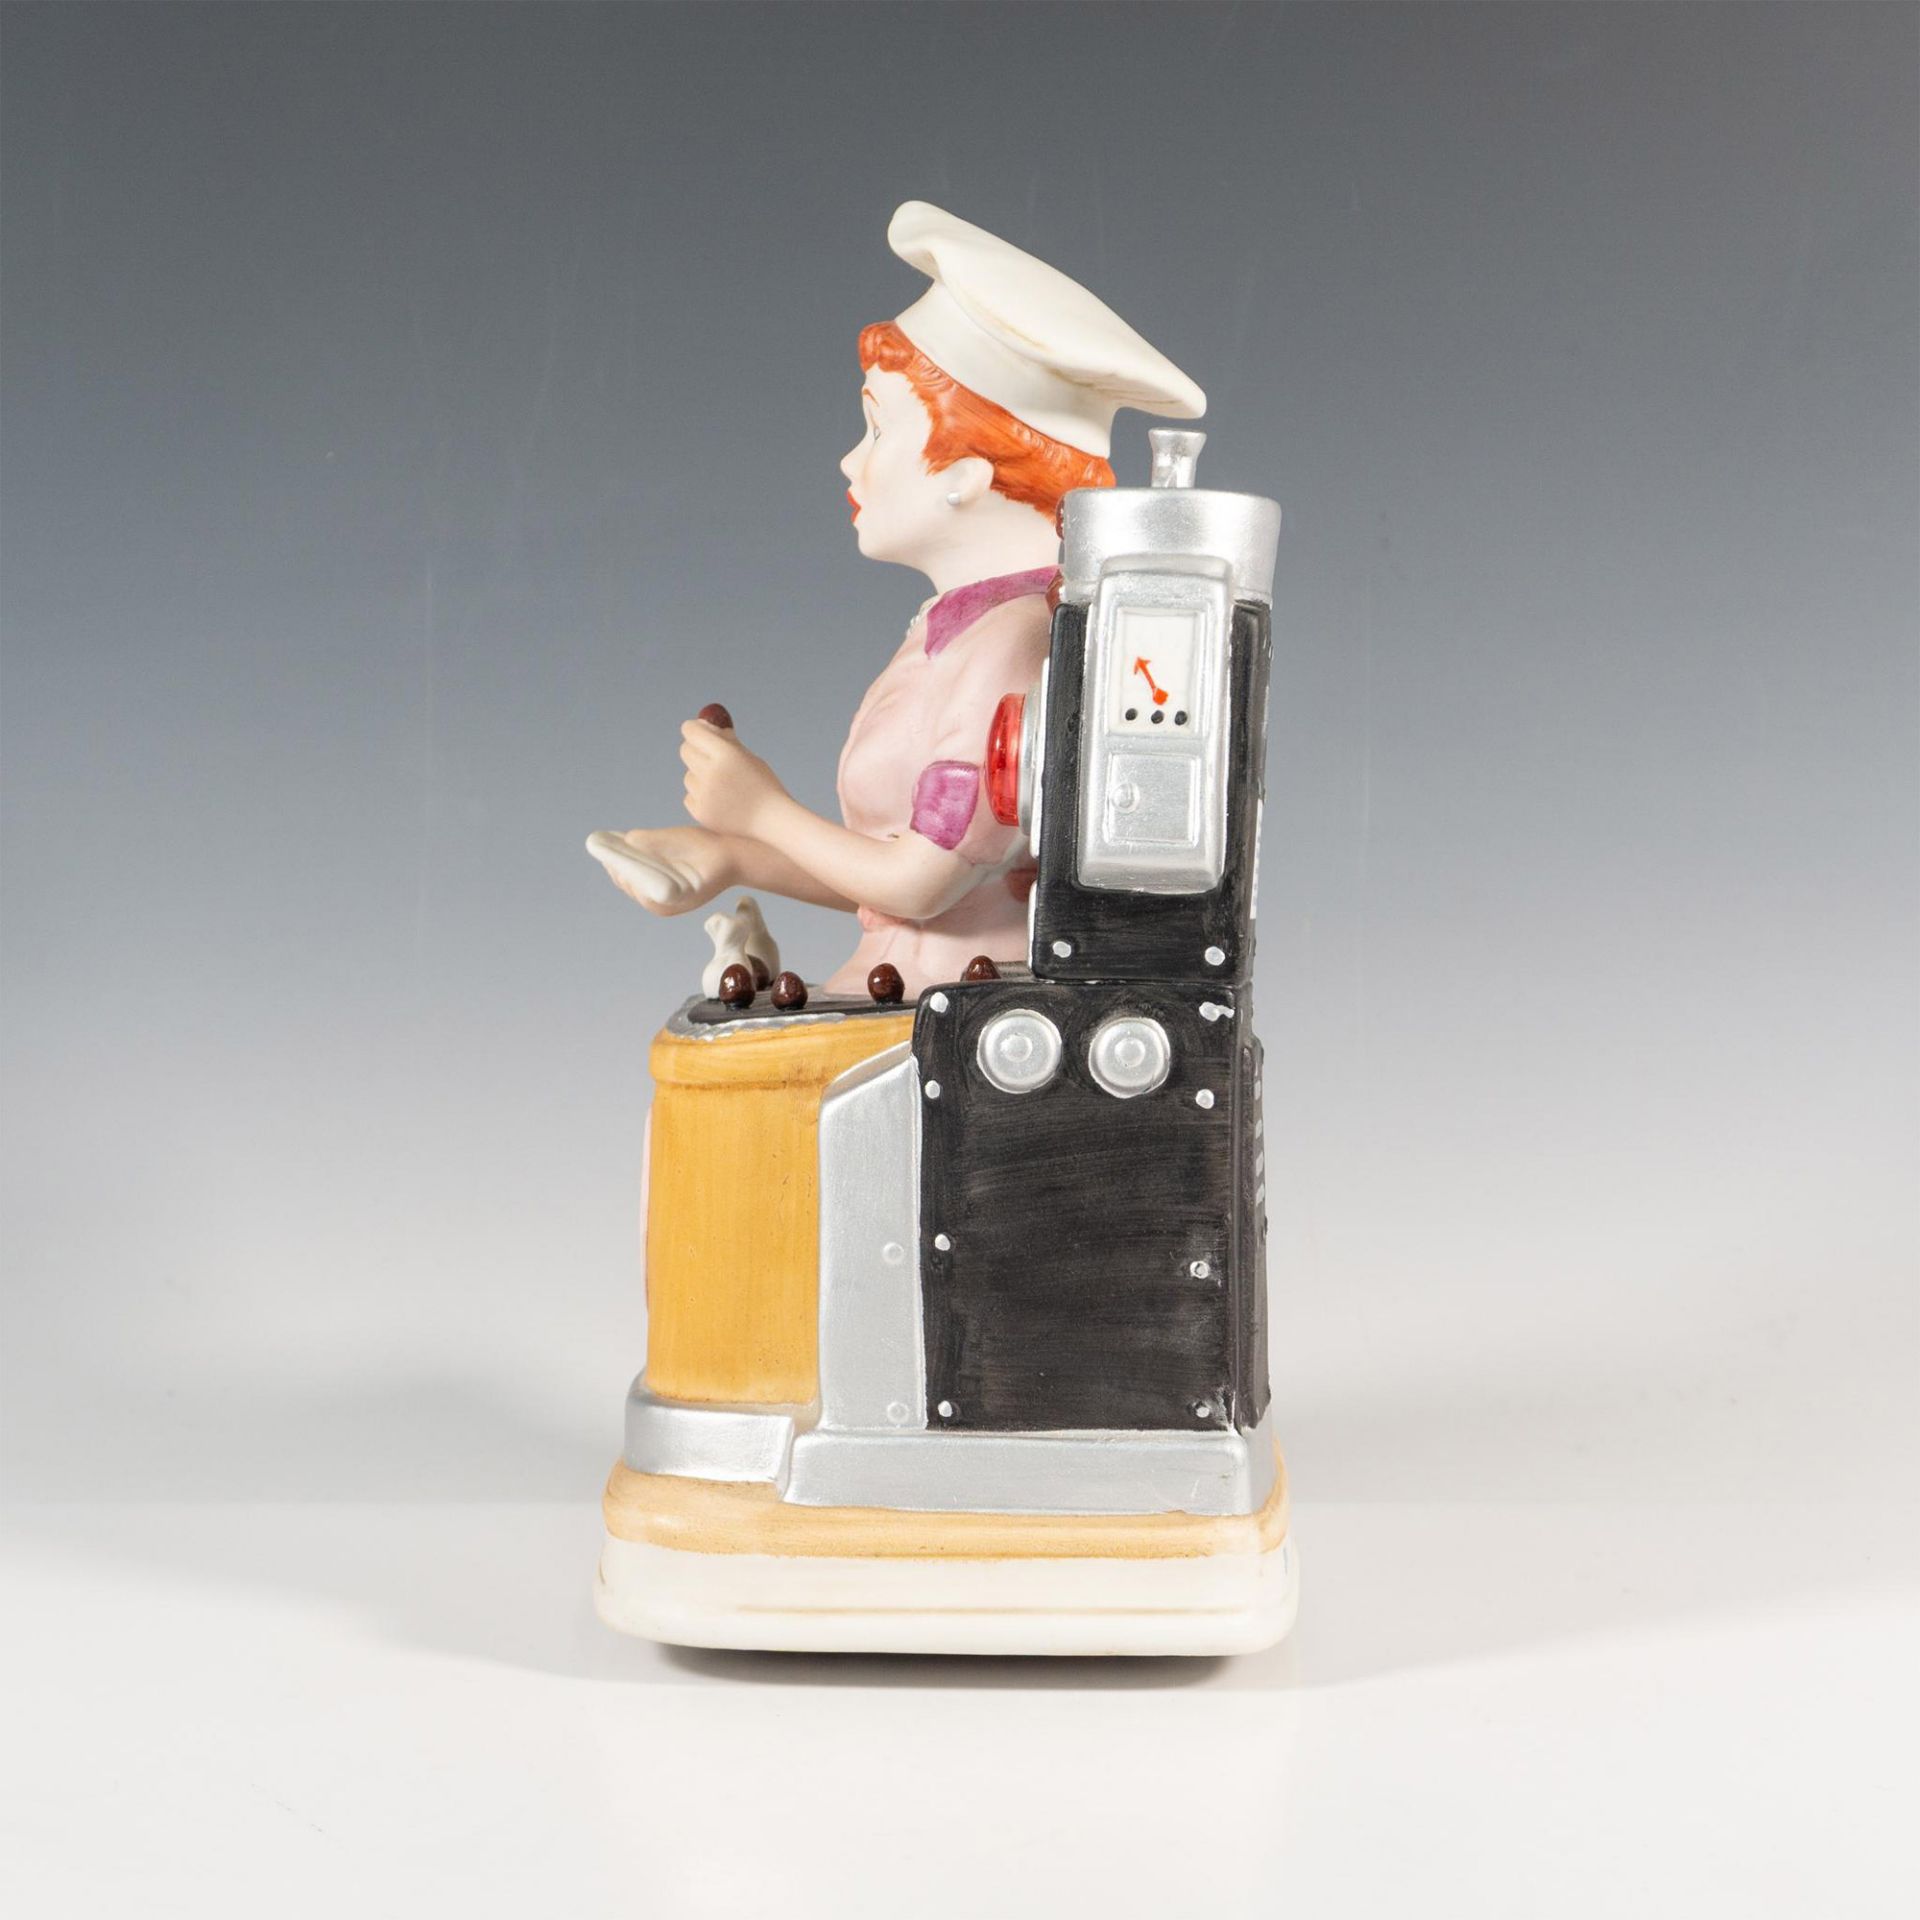 Waco Melody In Motion Musical I Love Lucy Figurine - Image 4 of 5